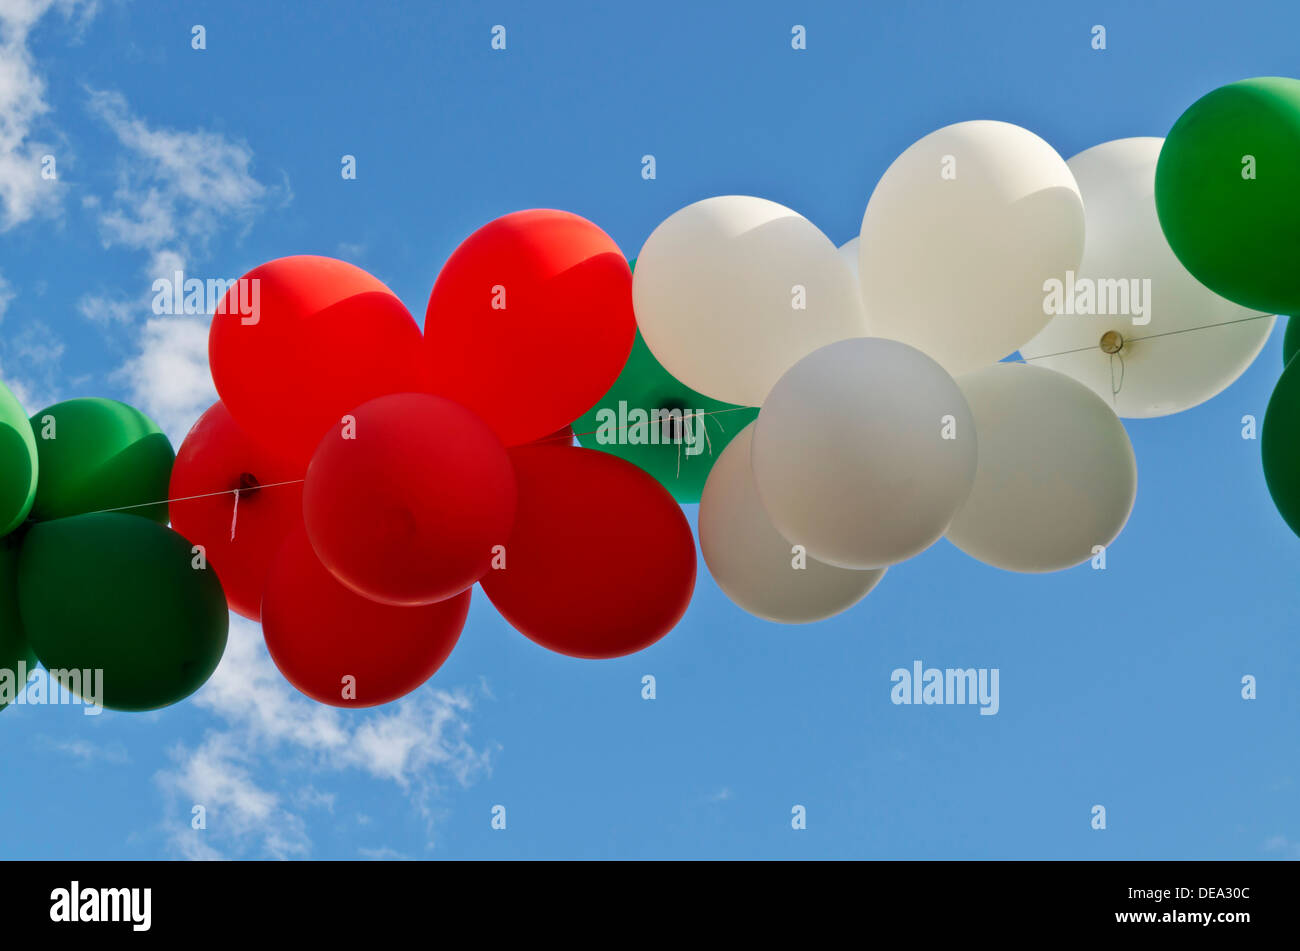 Colourful strand of red, white, and green balloons against a blue sky. Stock Photo